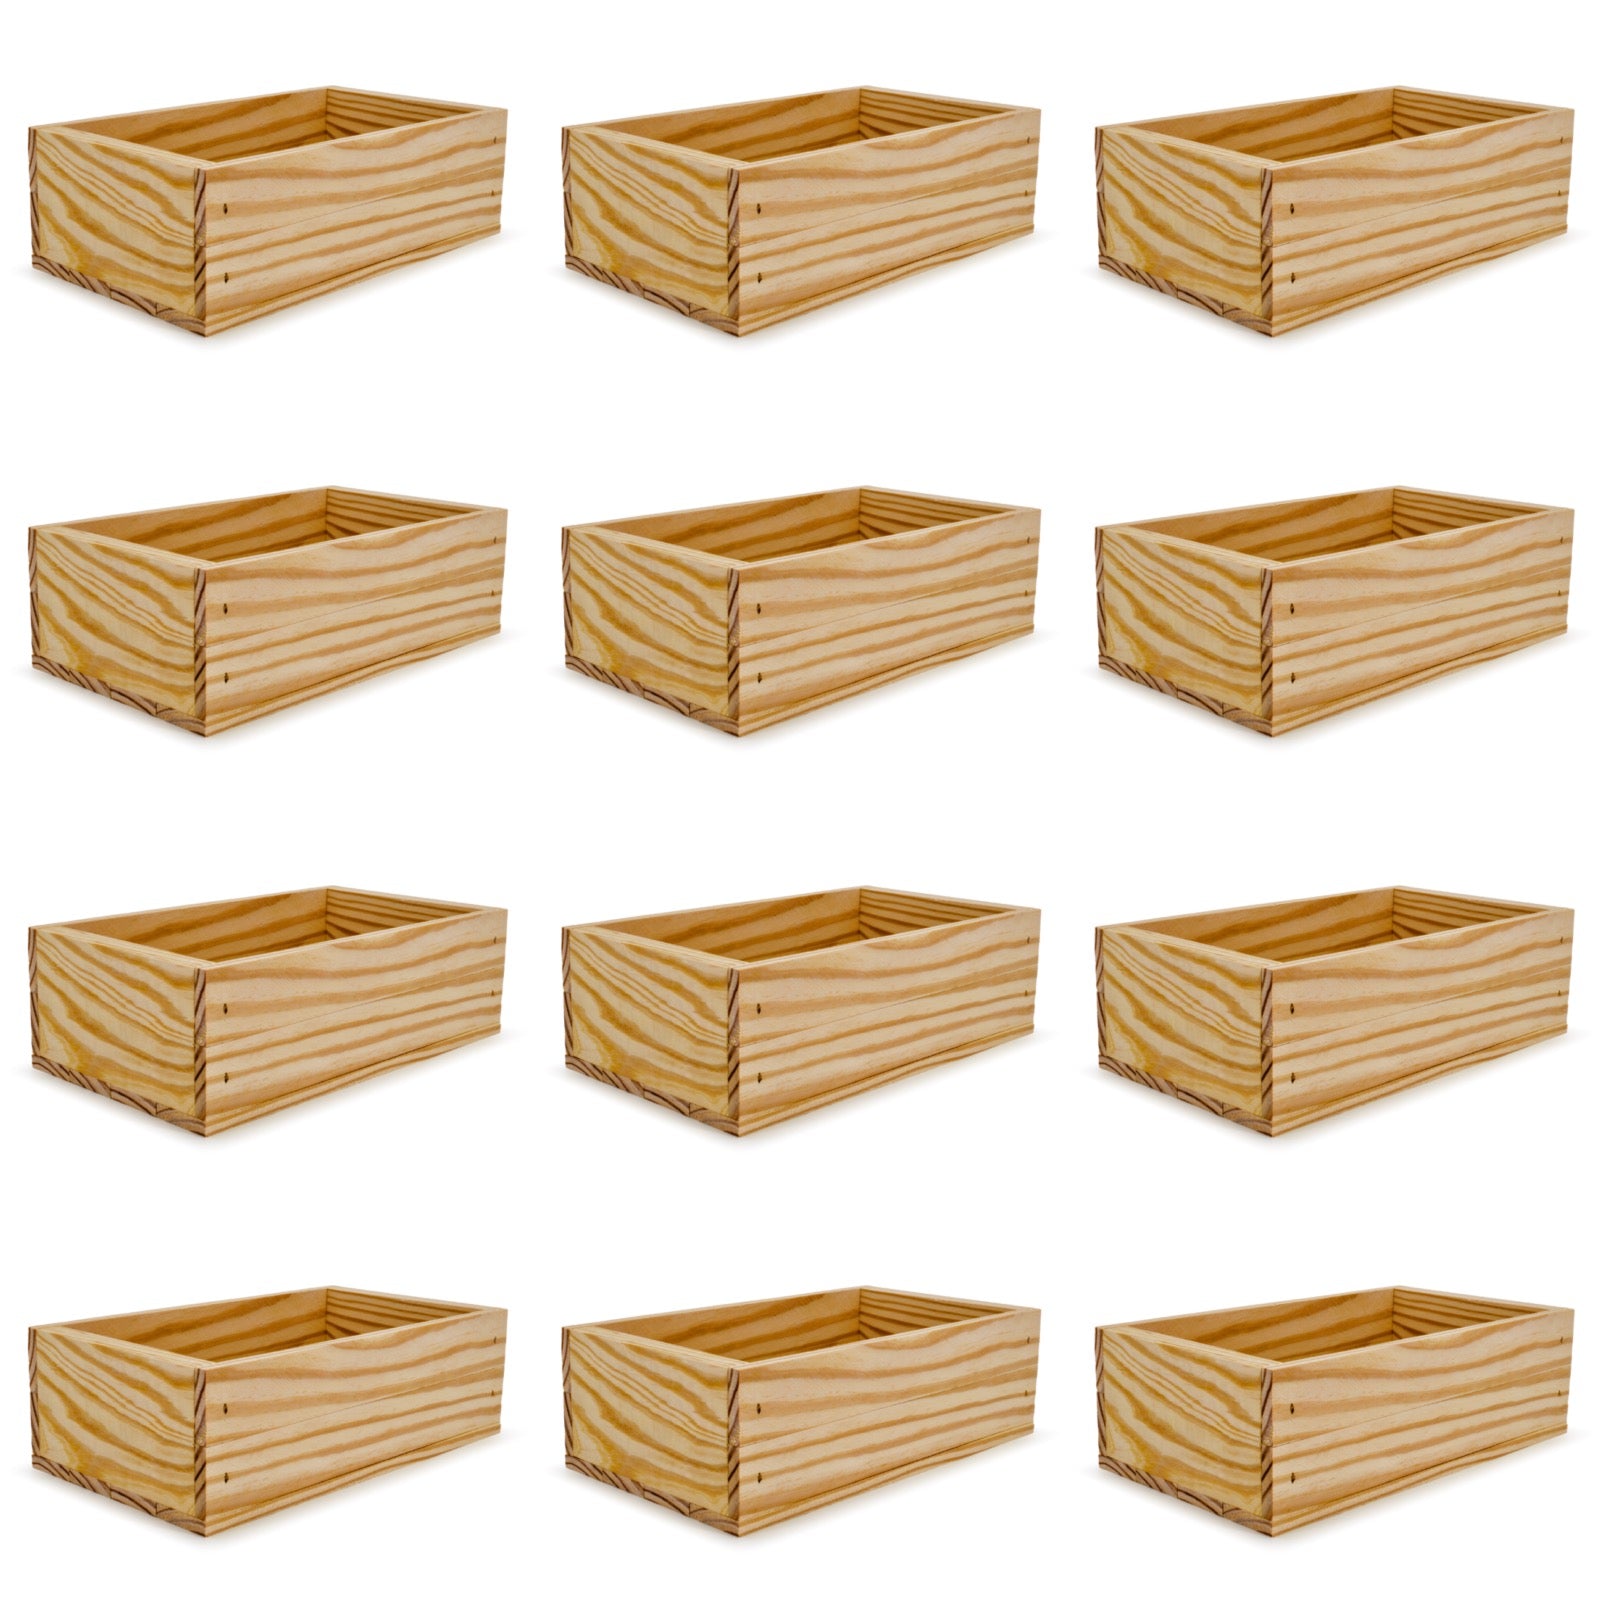 12 Small wooden crates 11x6.25x3.5